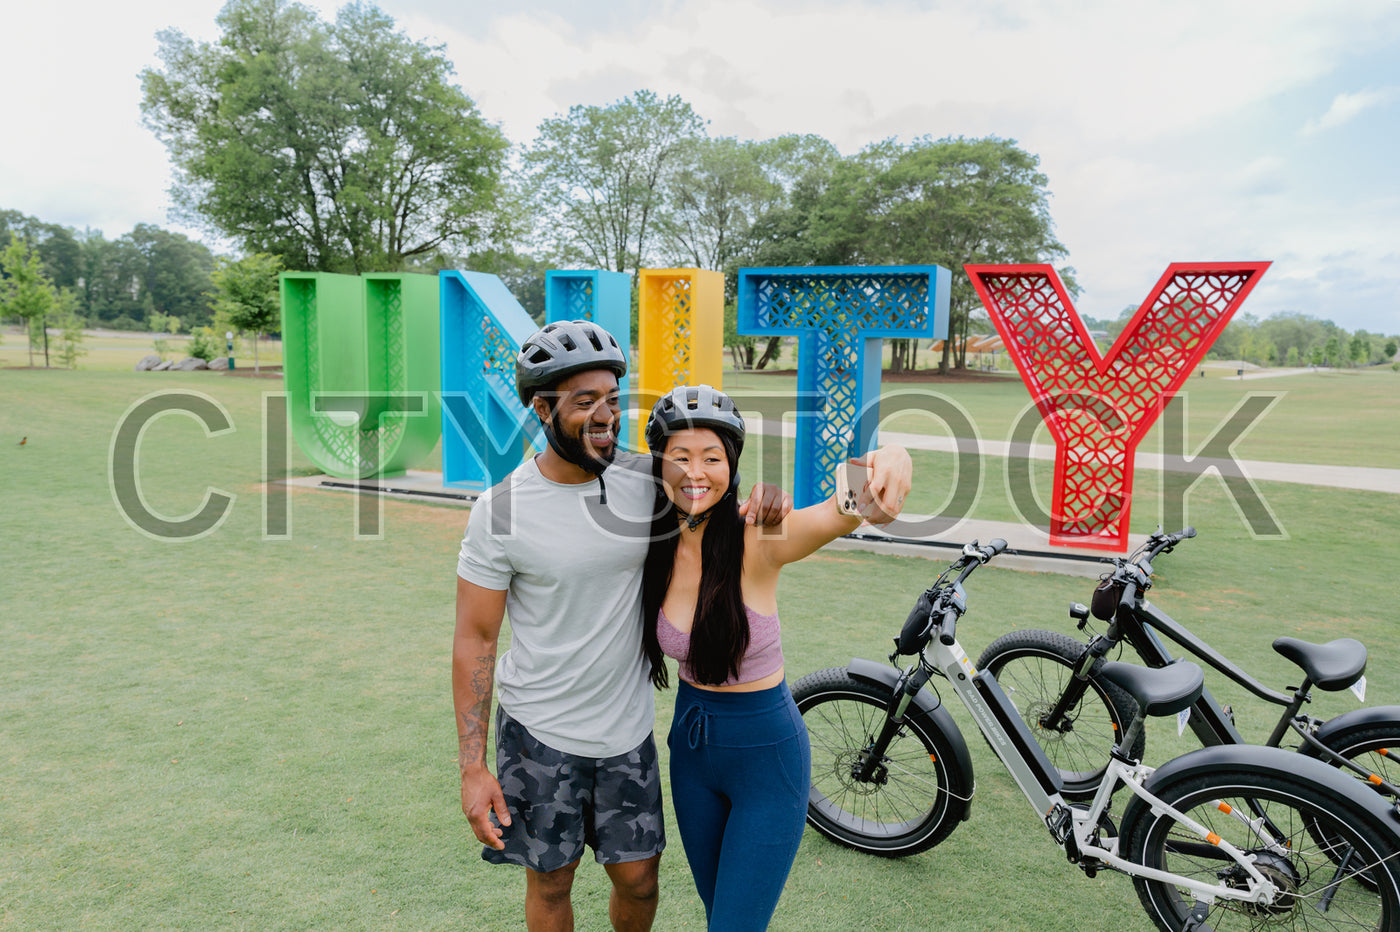 Smiling couple biking in Greenville park with UNITY sculpture